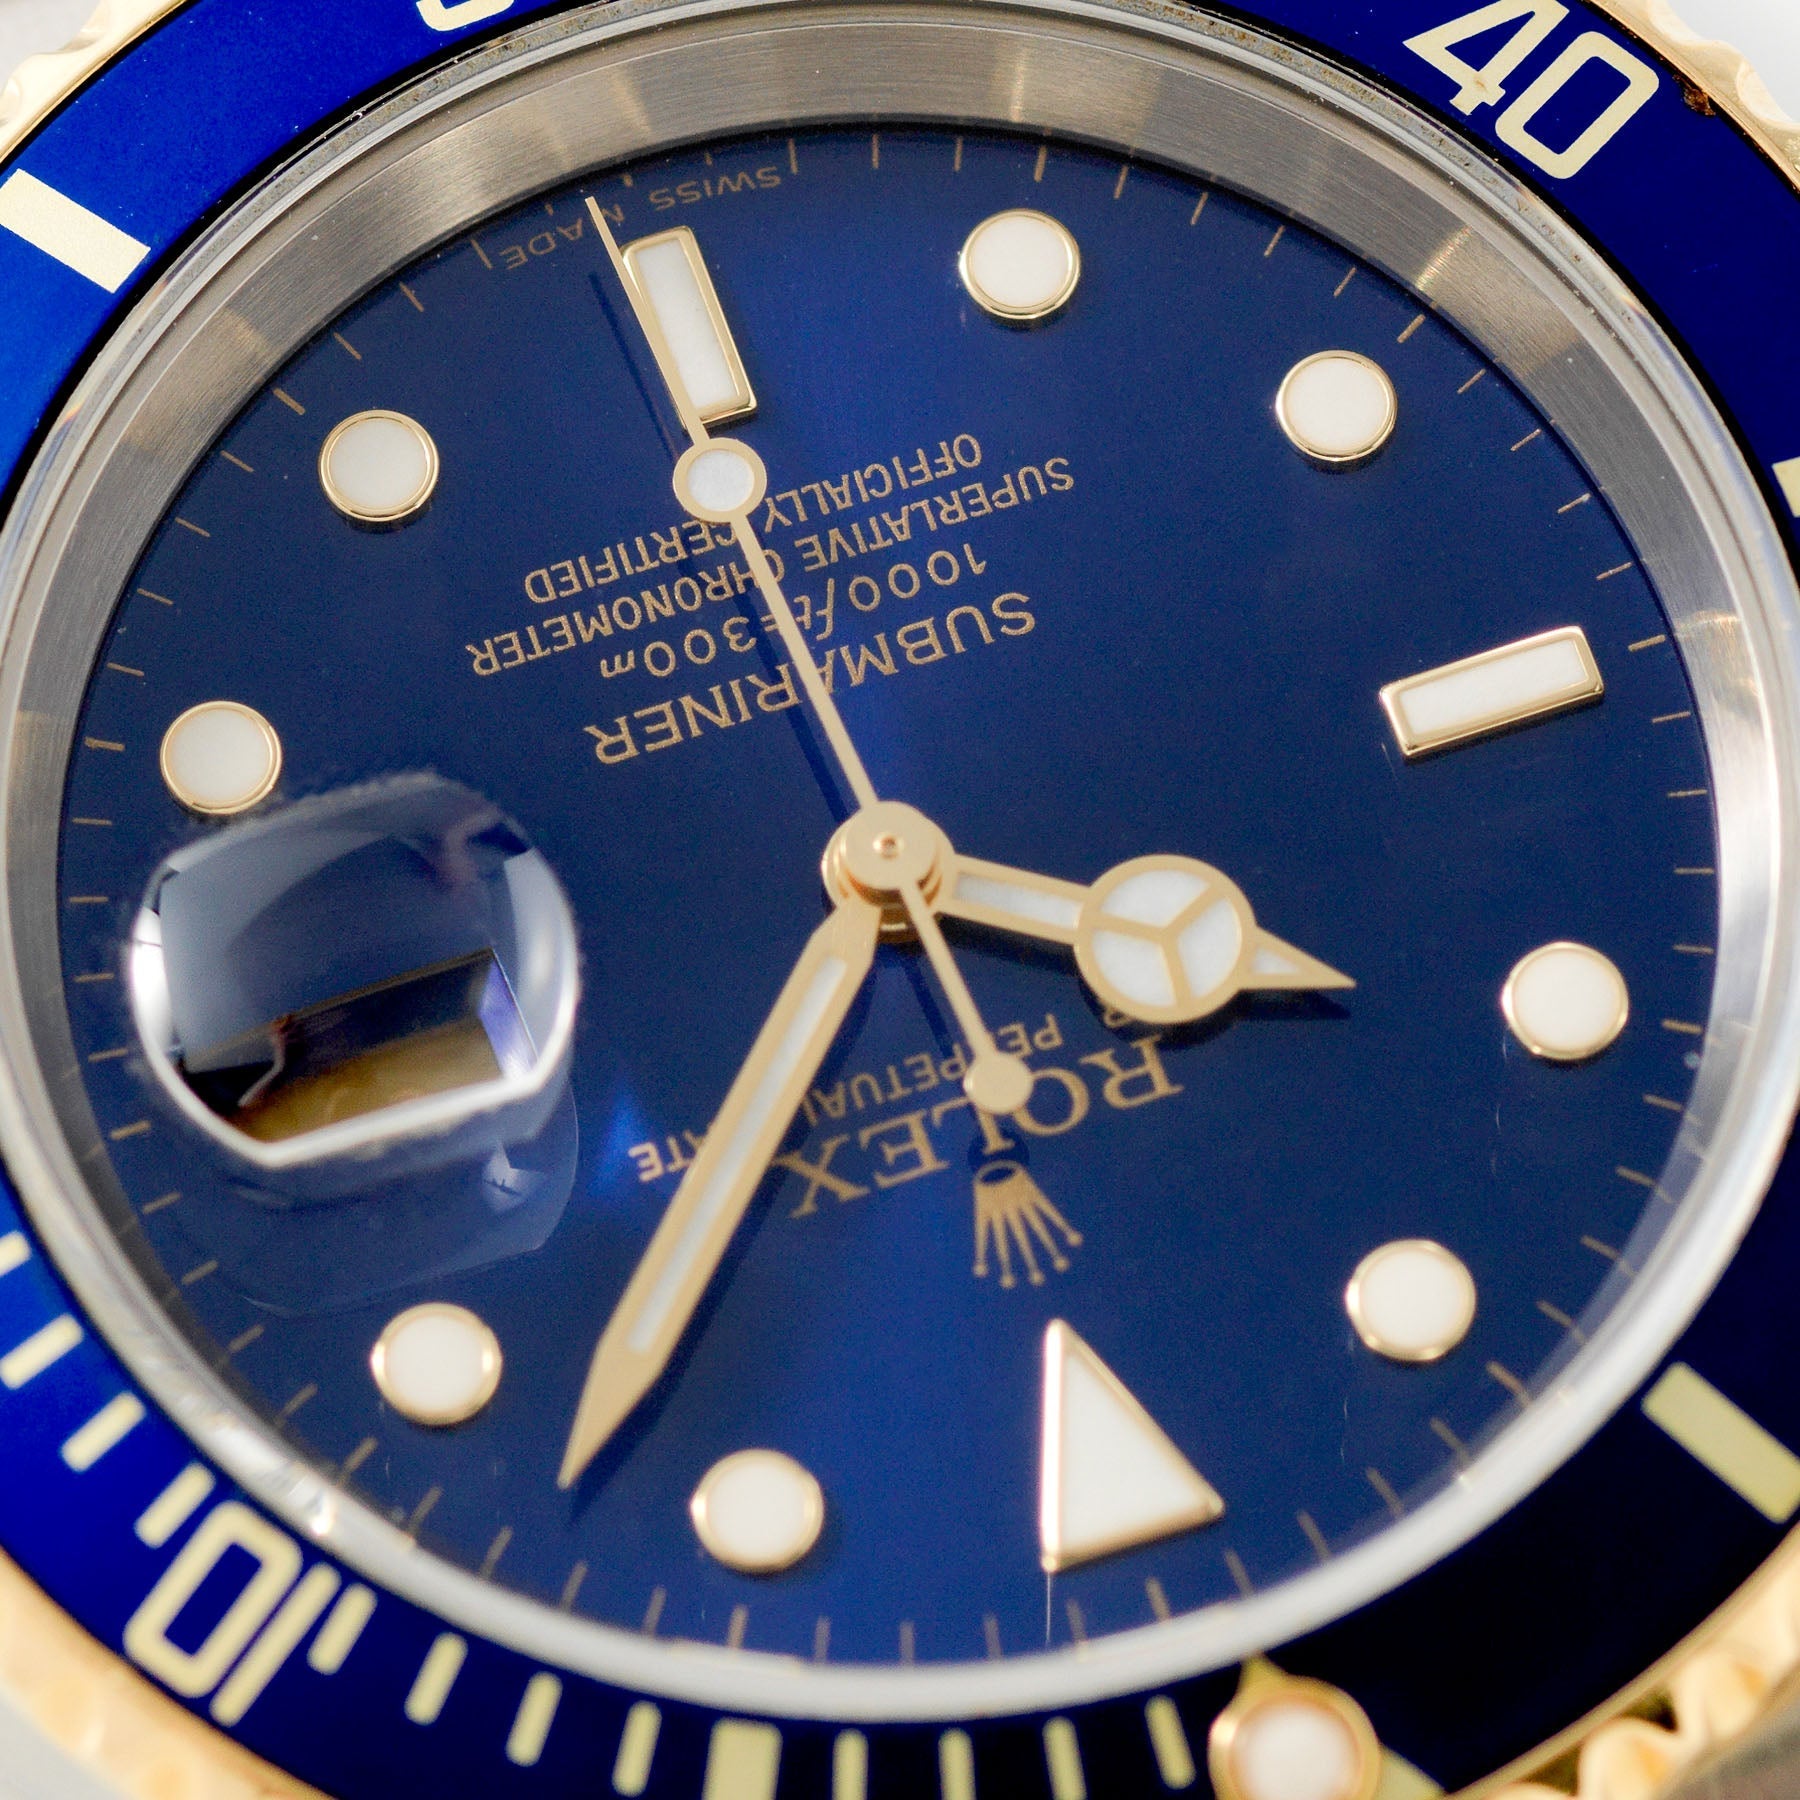 Rolex Submariner Date Blue Dial Two-Tone 16613